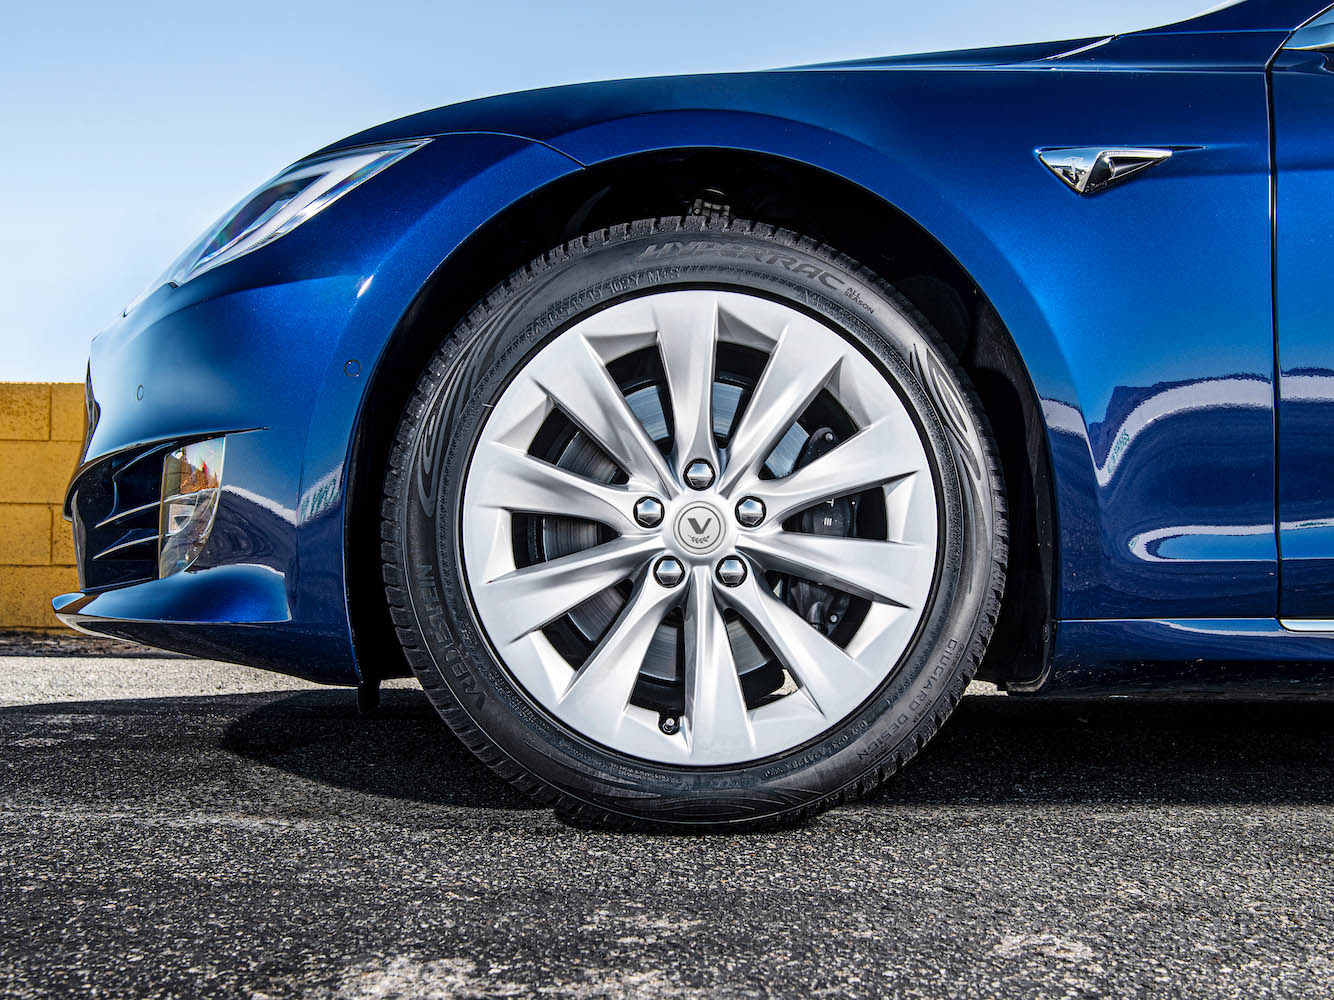 Vredestein tires is making its debut in the U.S. market.